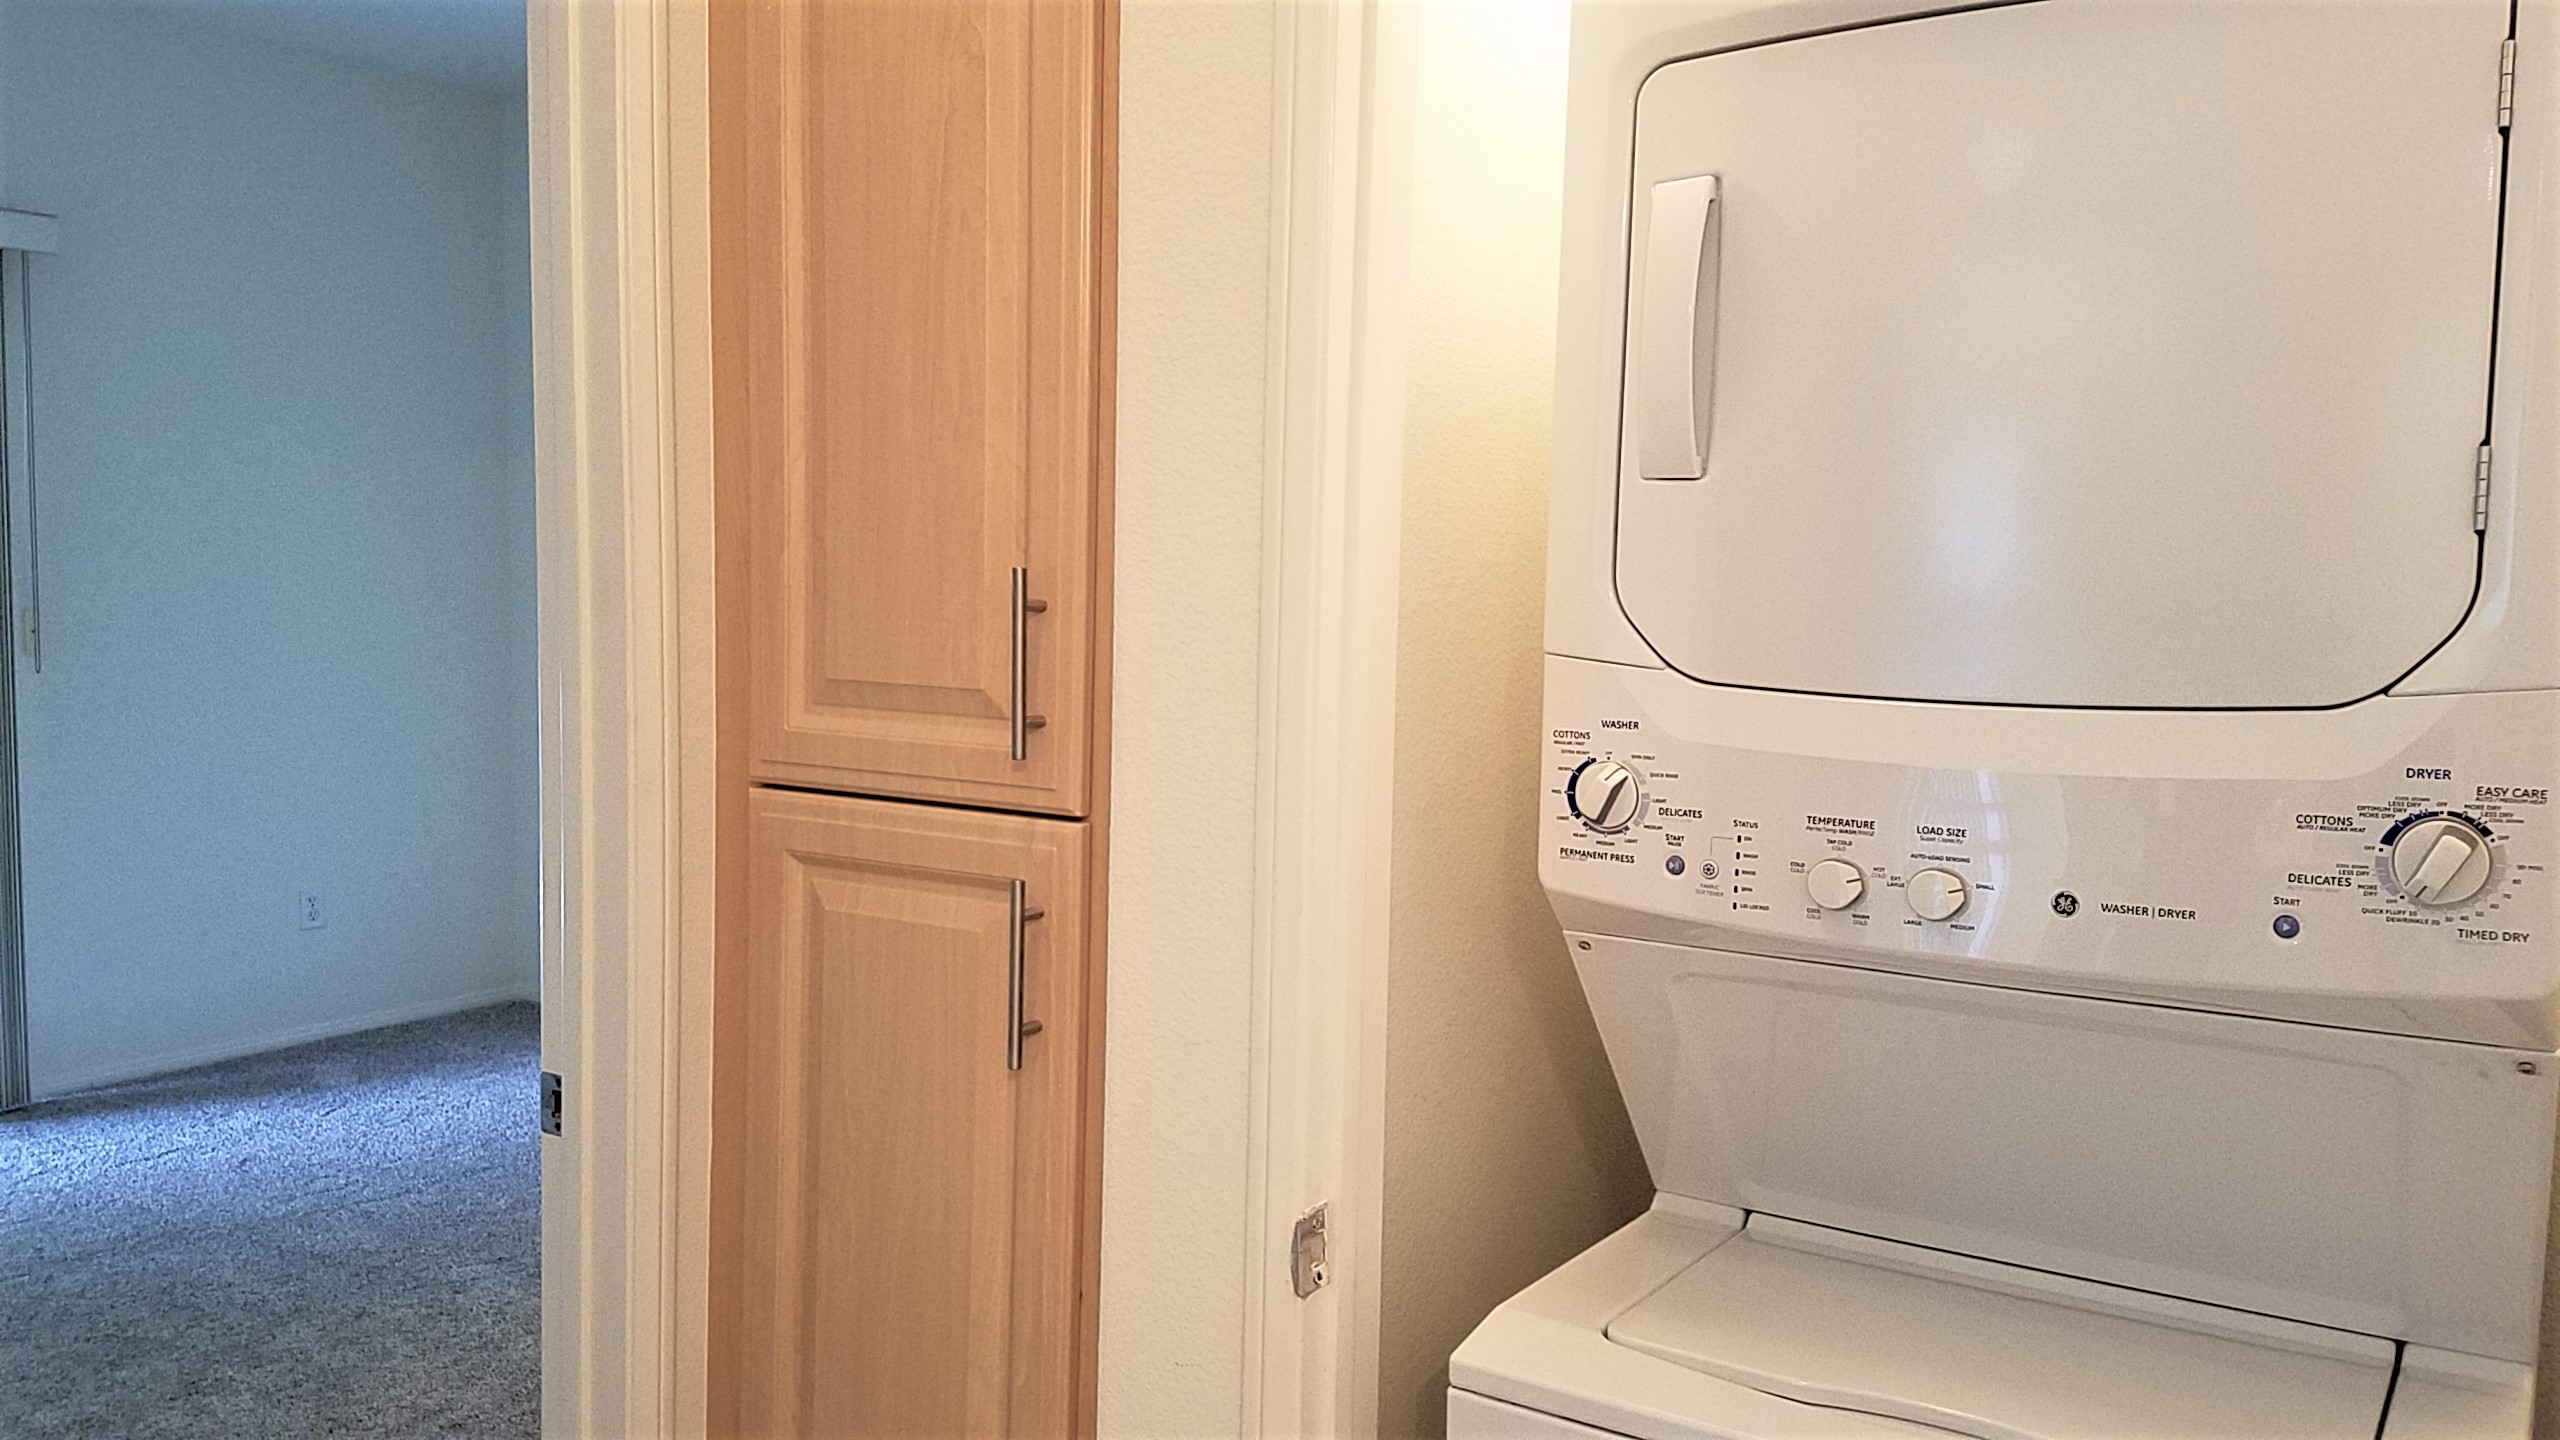 IN-UNIT WASHER AND DRYER